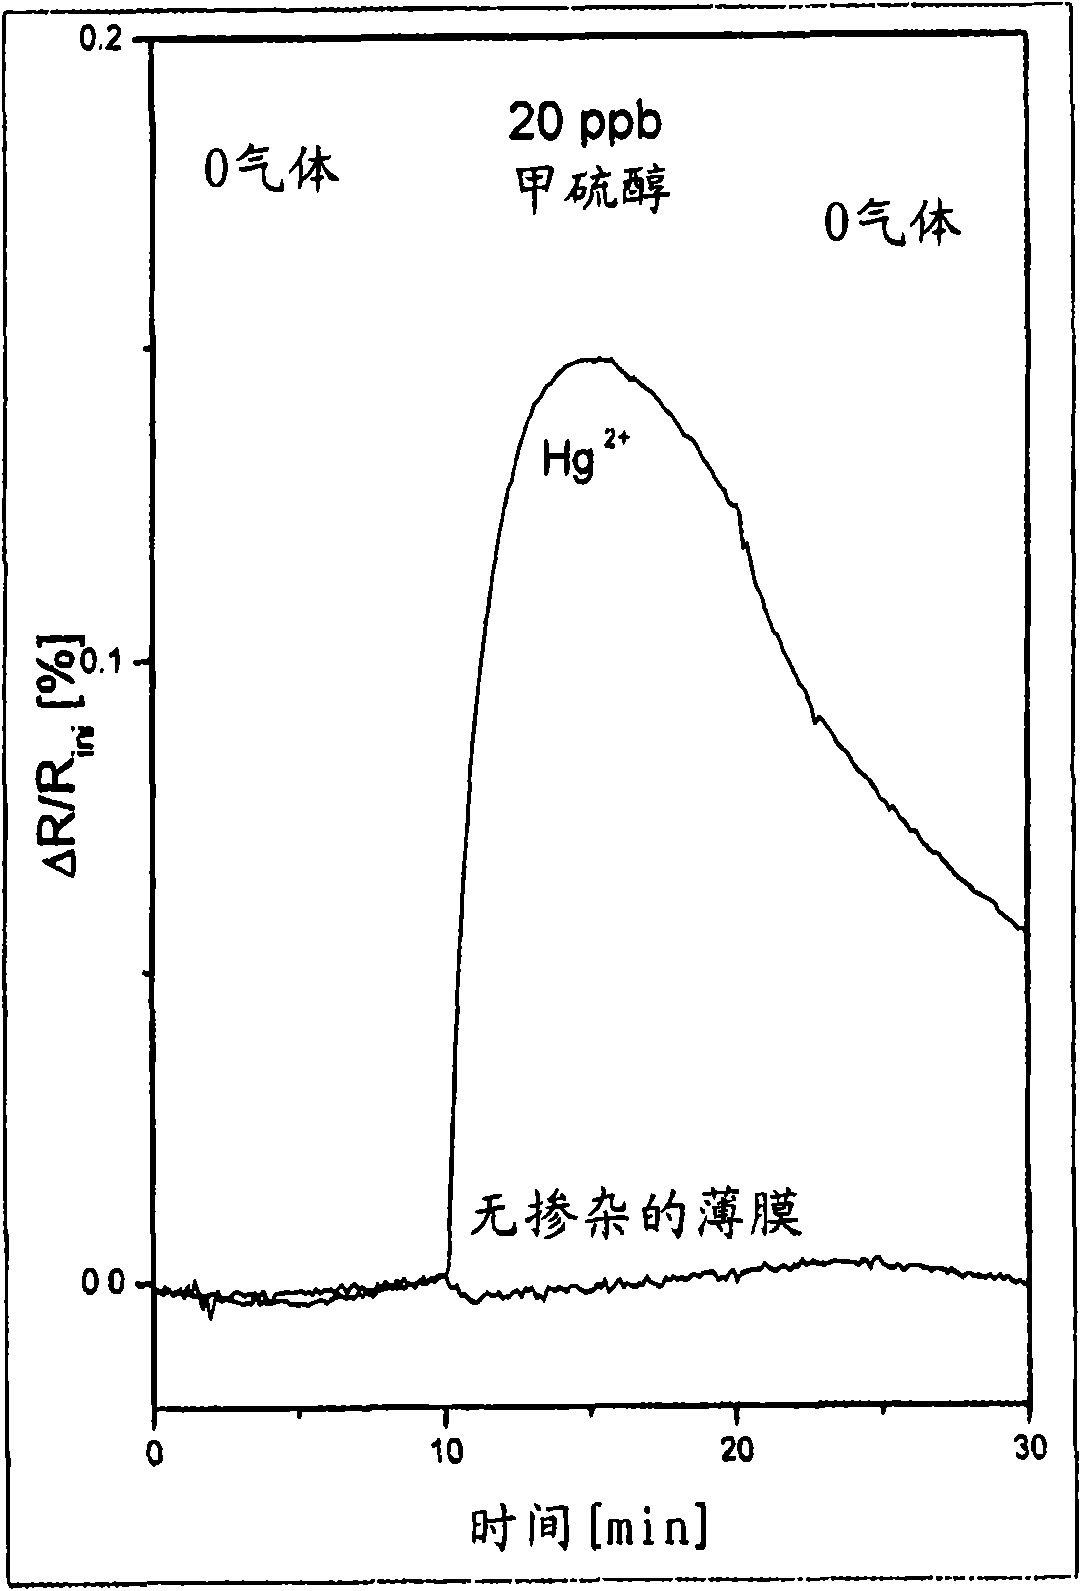 Use of a nanoparticle film having metal ions incorporated